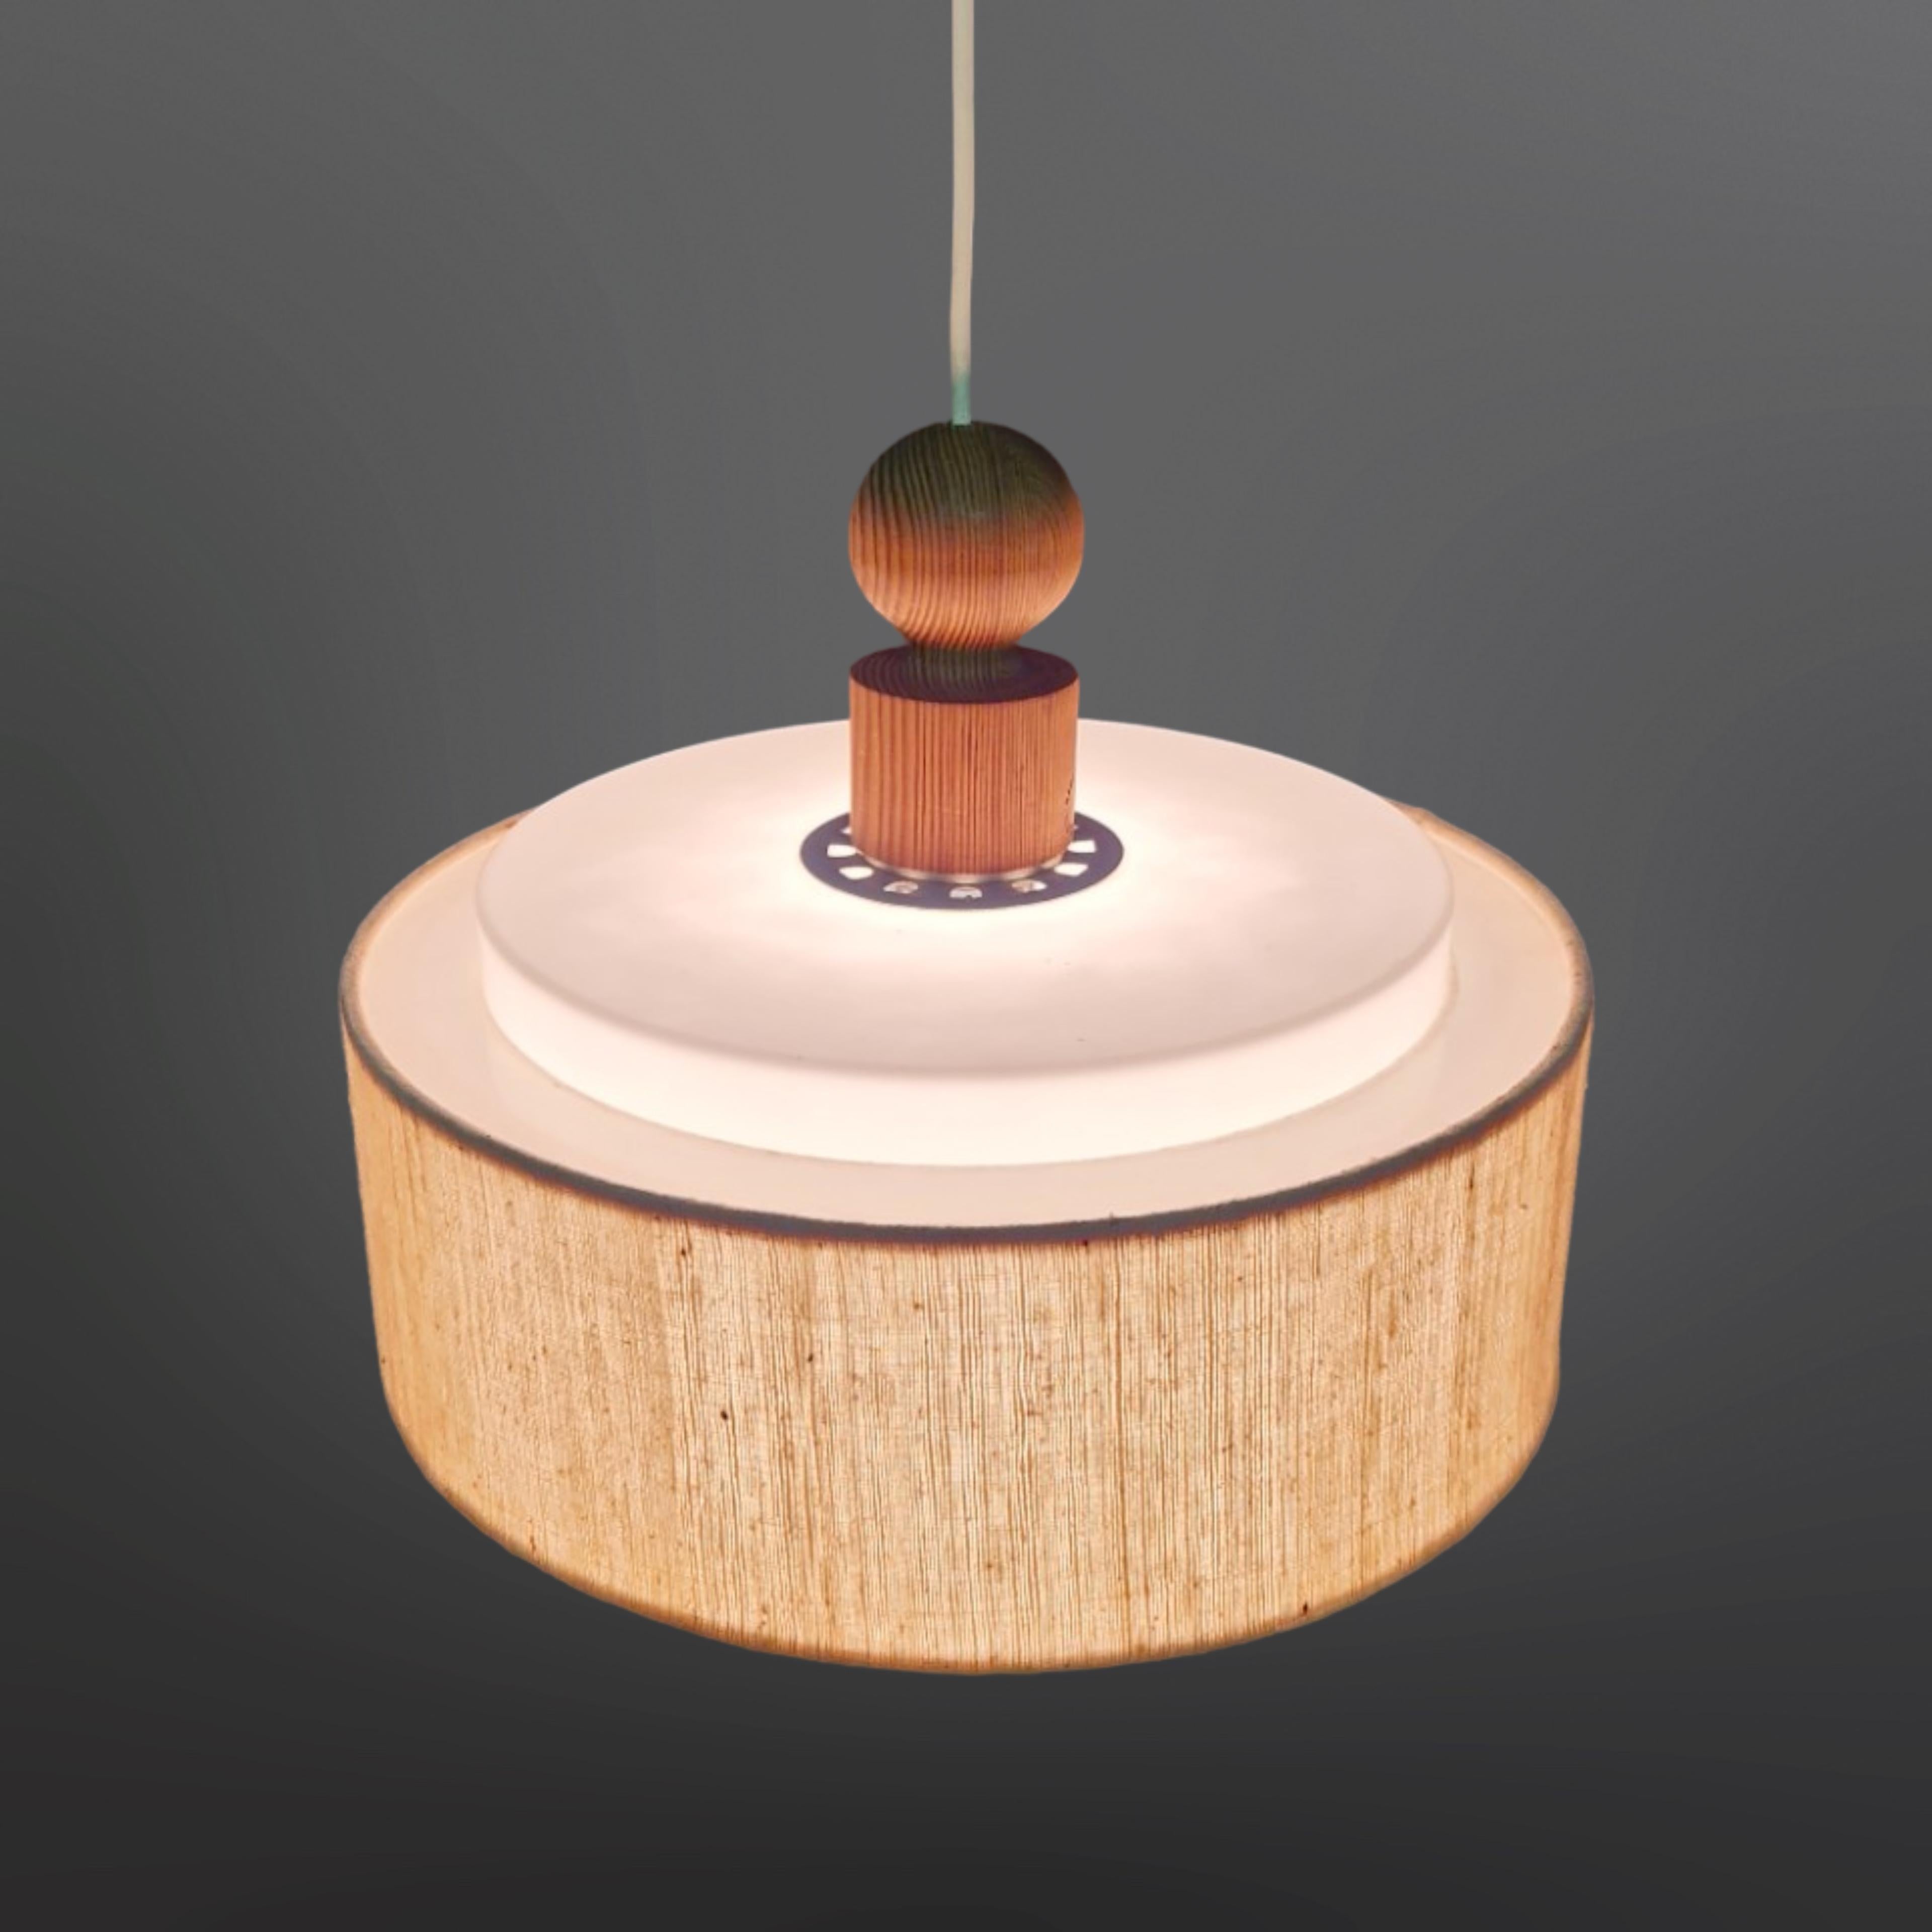 Mid century Scandinavian modern pendant lamp. Designed by Uno and Östen Kristiansson for Luxus Sweden in the 1960s. It has a pine gallery with plexiglass top and bottom diffusers and a fabric surrounding rim. 

The height is 30cm measured from the